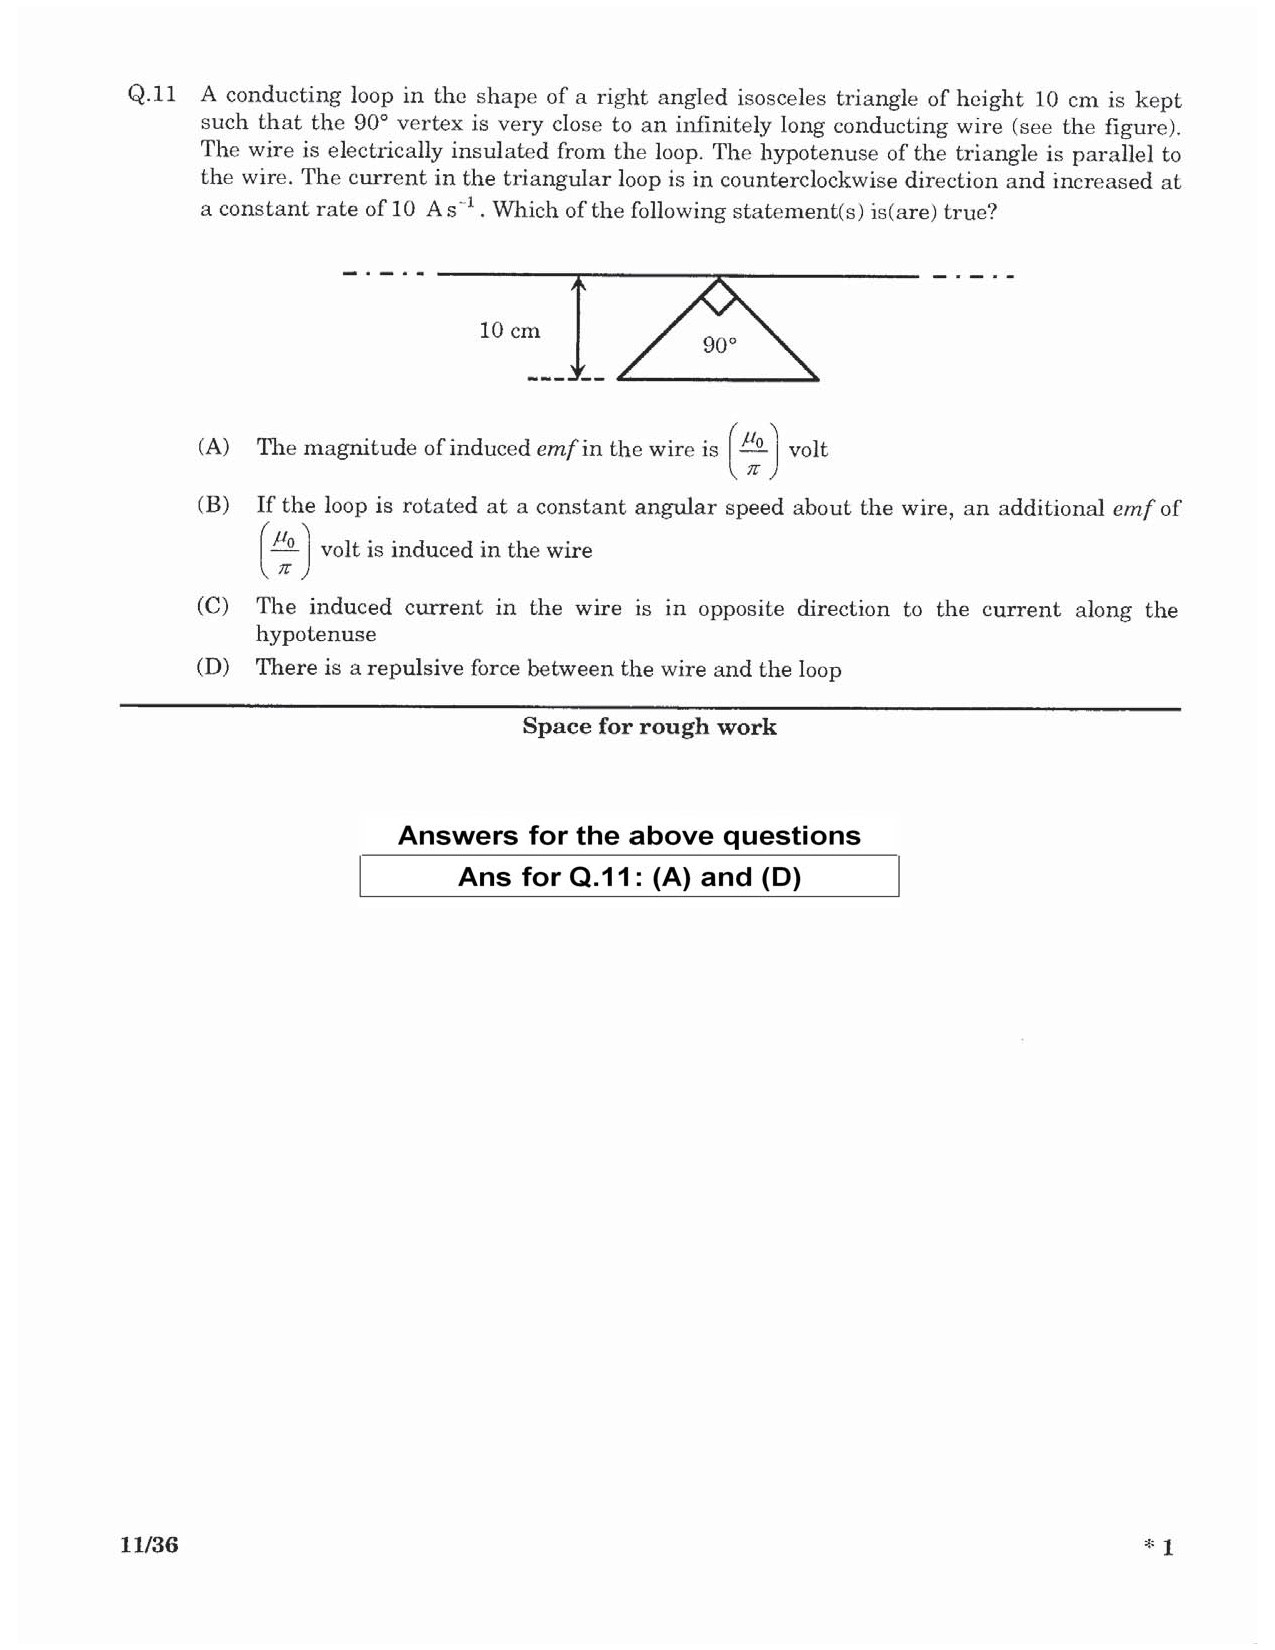 JEE Advanced Exam Question Paper 2016 Paper 1 Physics 9